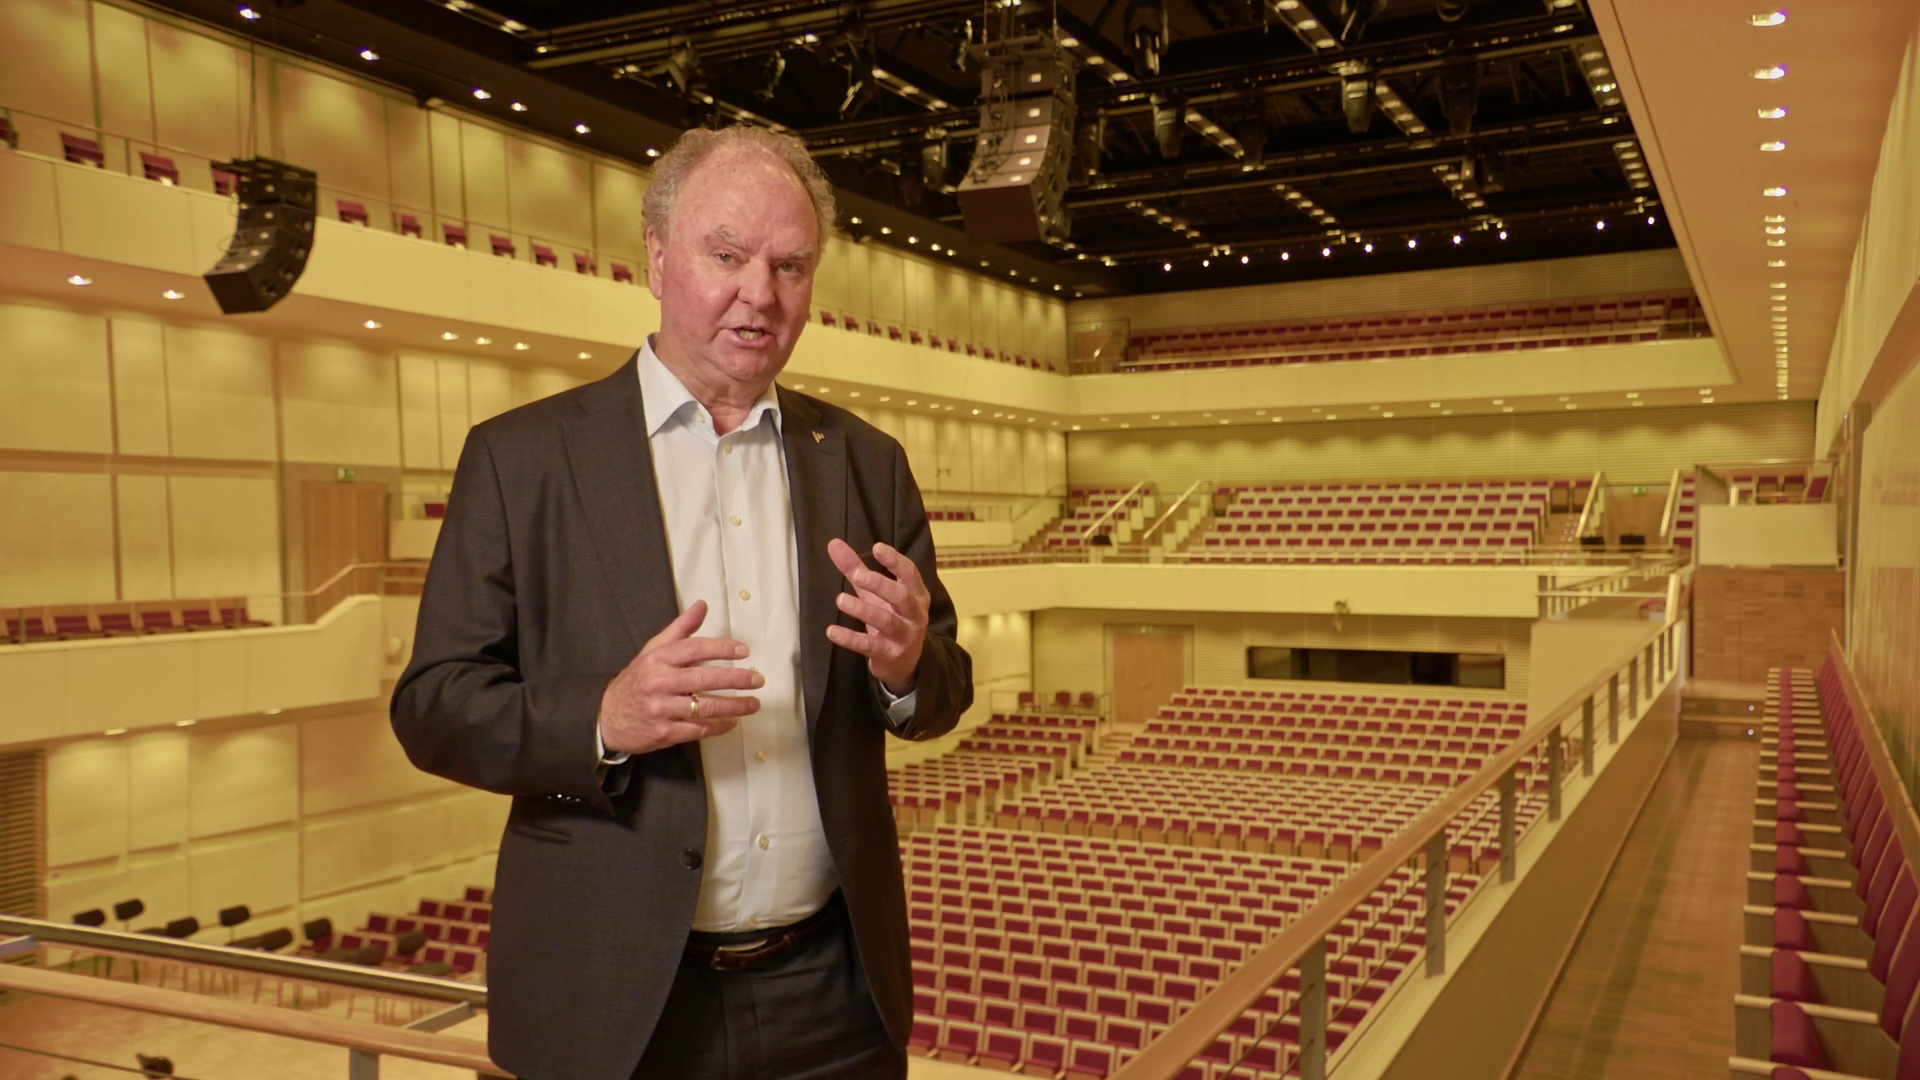 Andreas Sonning in the concert hall in Grafenegg.